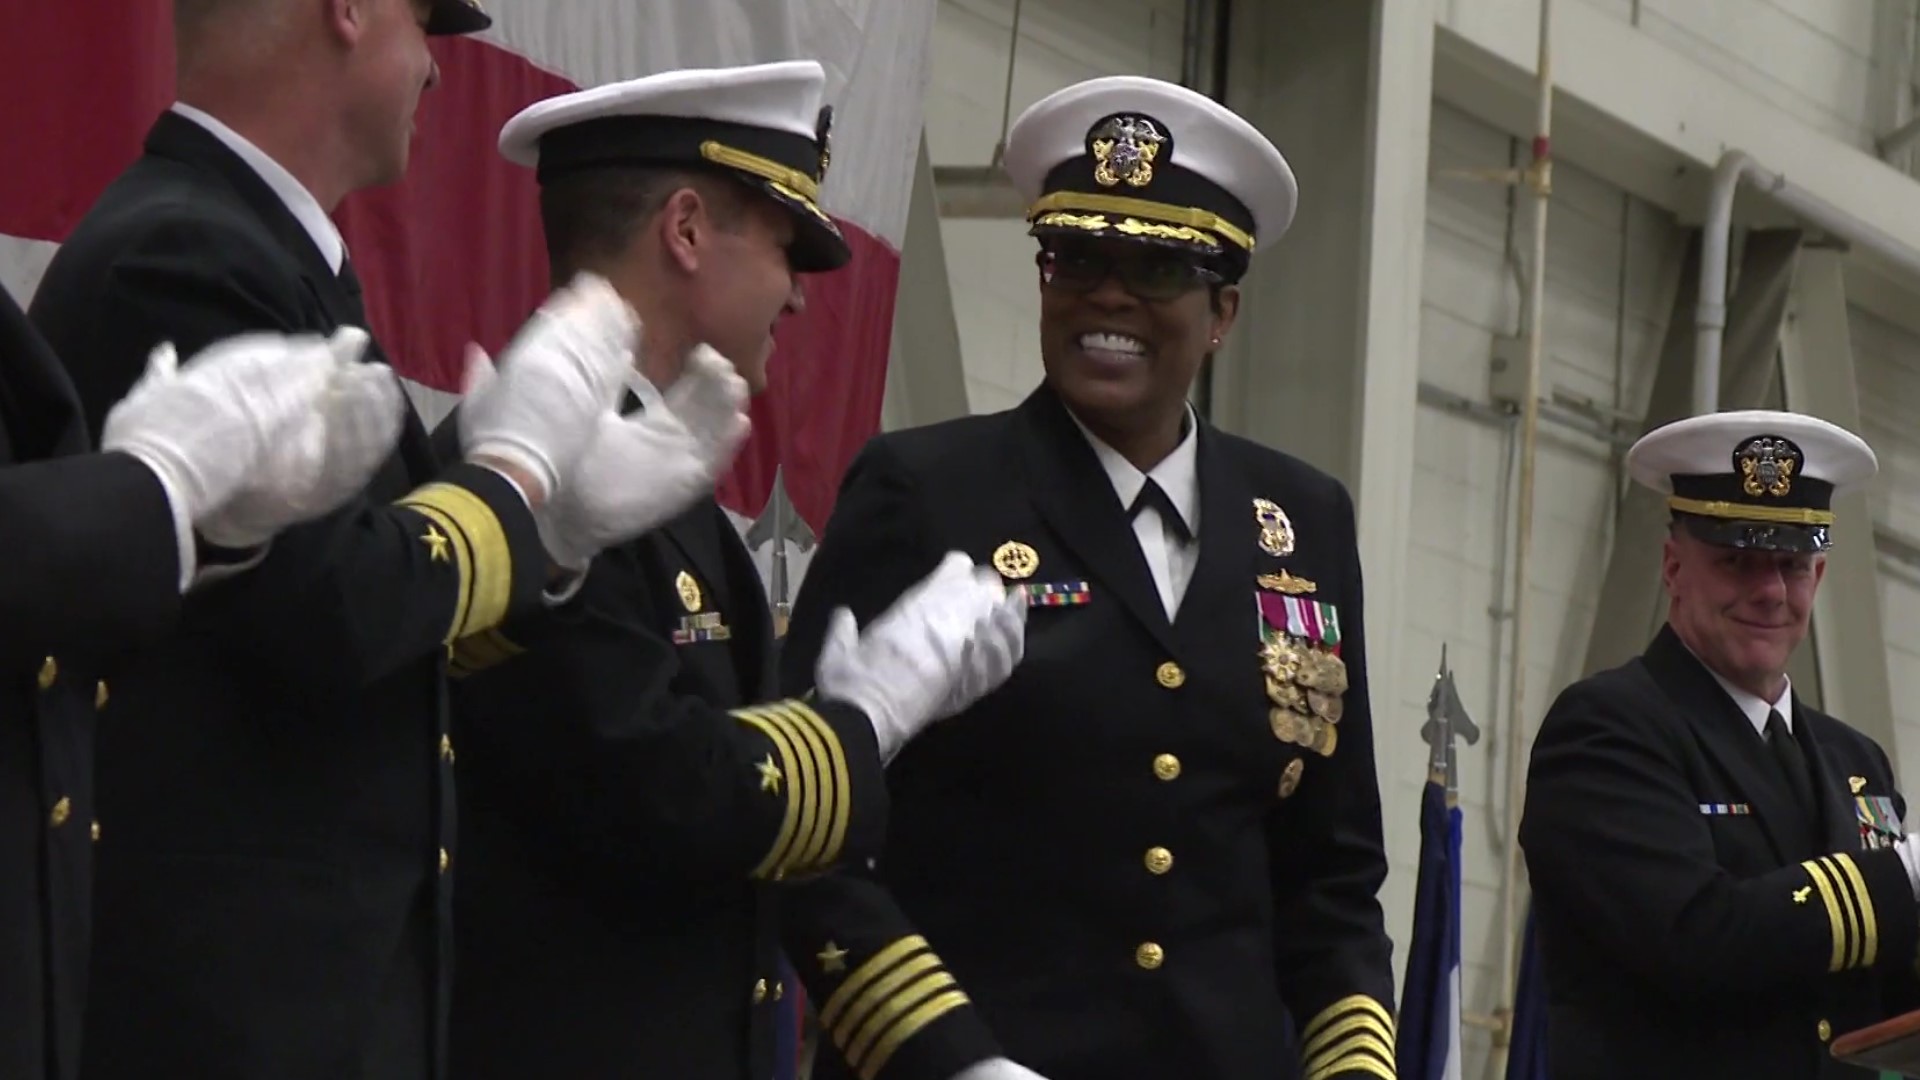 Captain Janet Days takes over as the 51st commanding officer of the world's largest naval base.